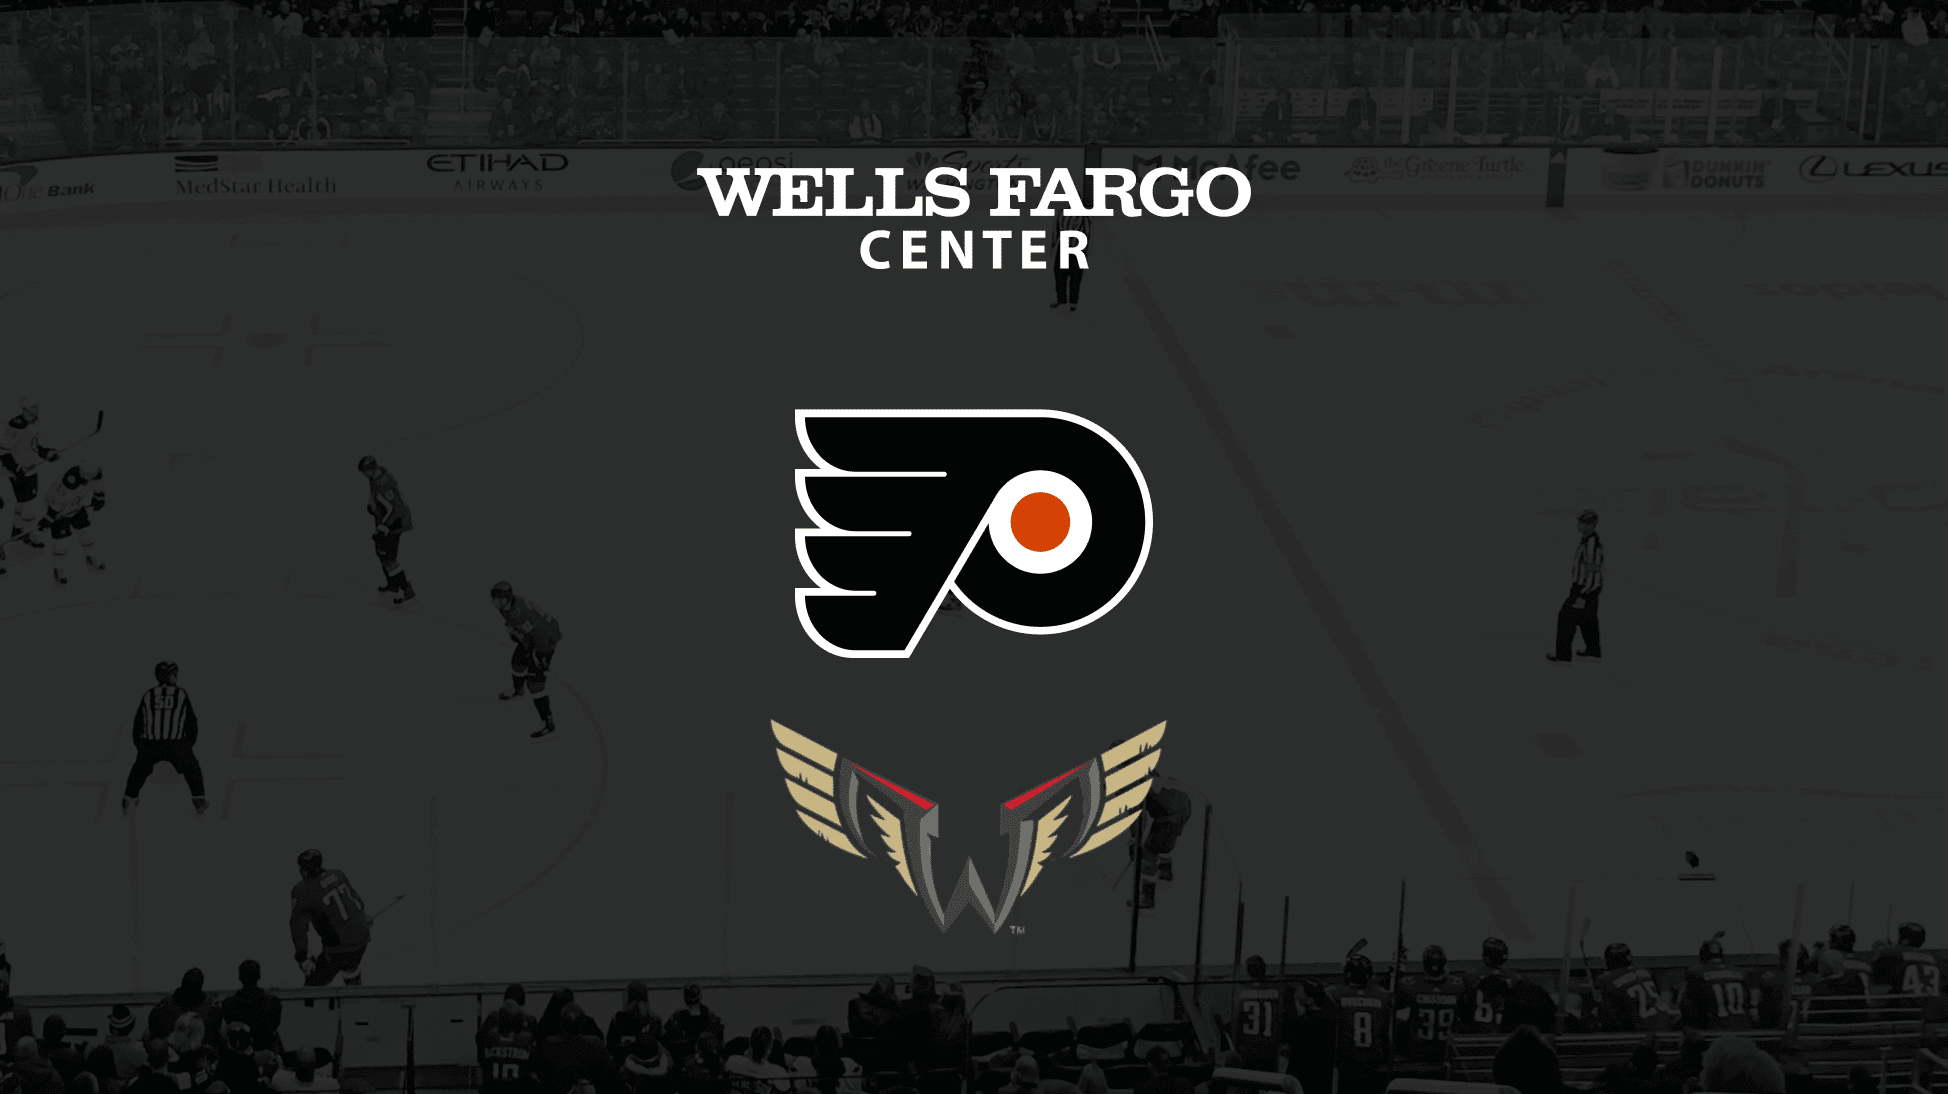 philadelphia flyers and wings logo with Wells Fargo center logo over a hockey arena